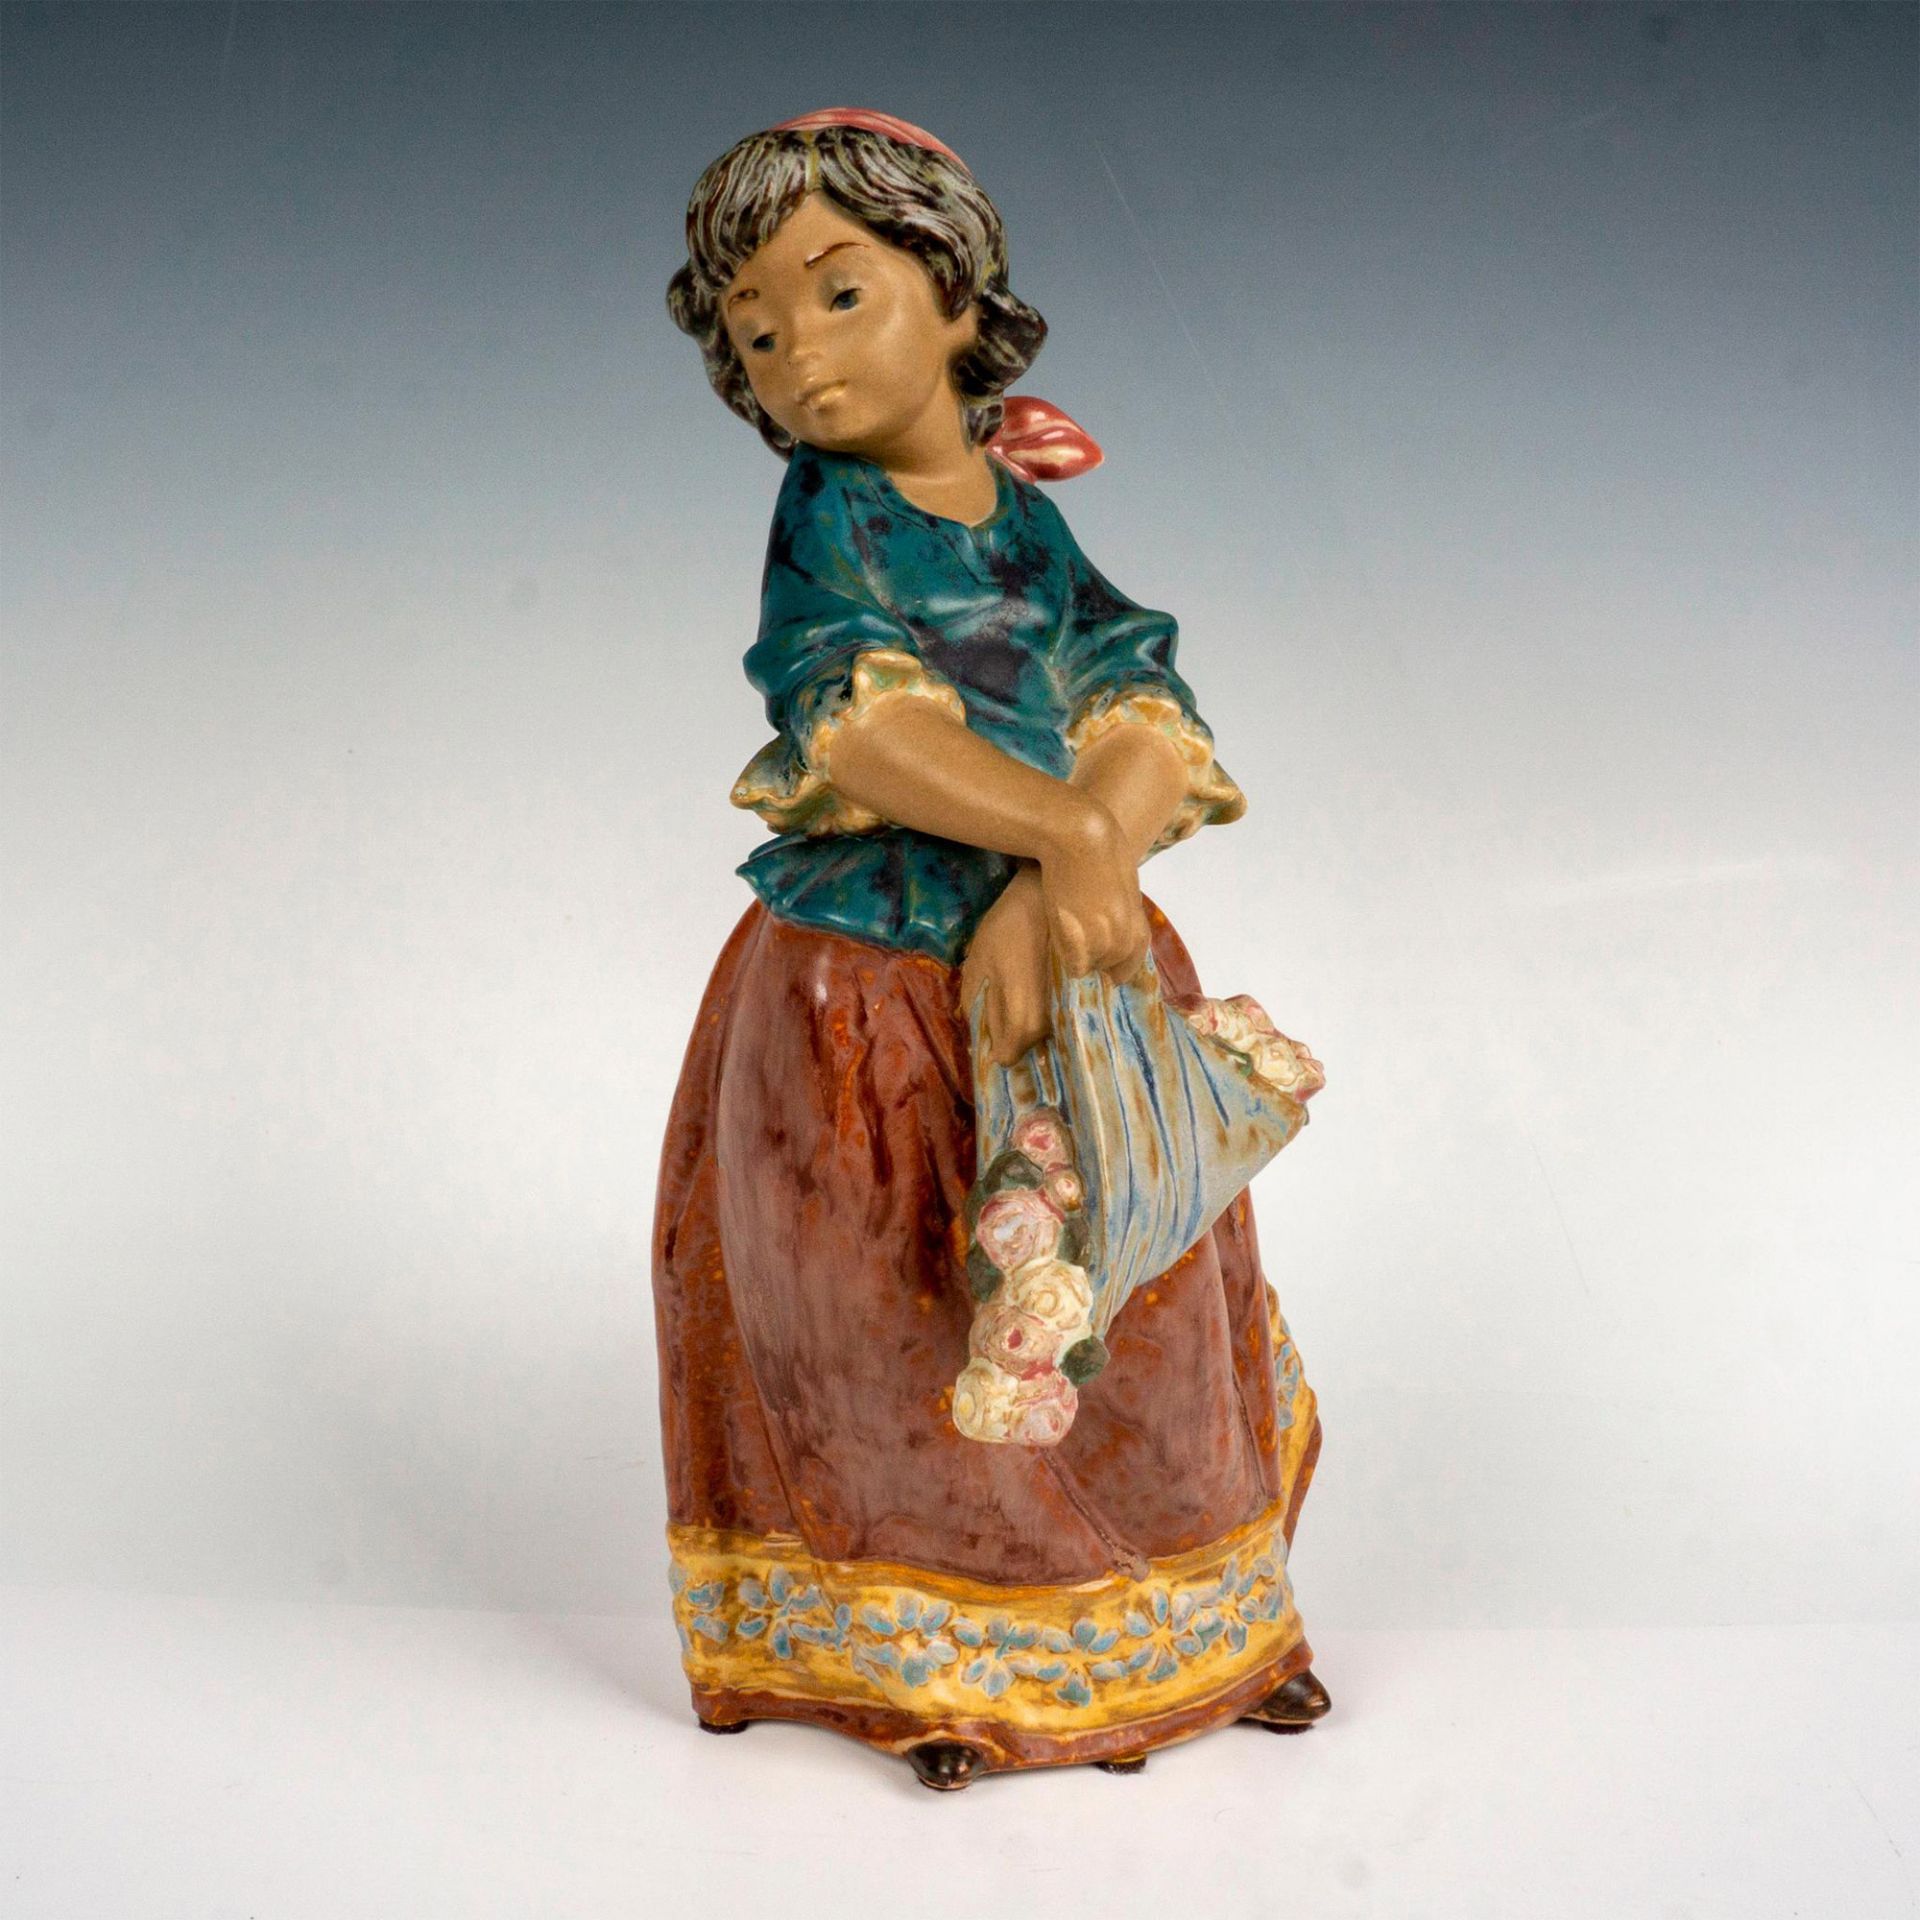 Lladro Porcelain Figurine, Girl Carrying Flowers 1013507